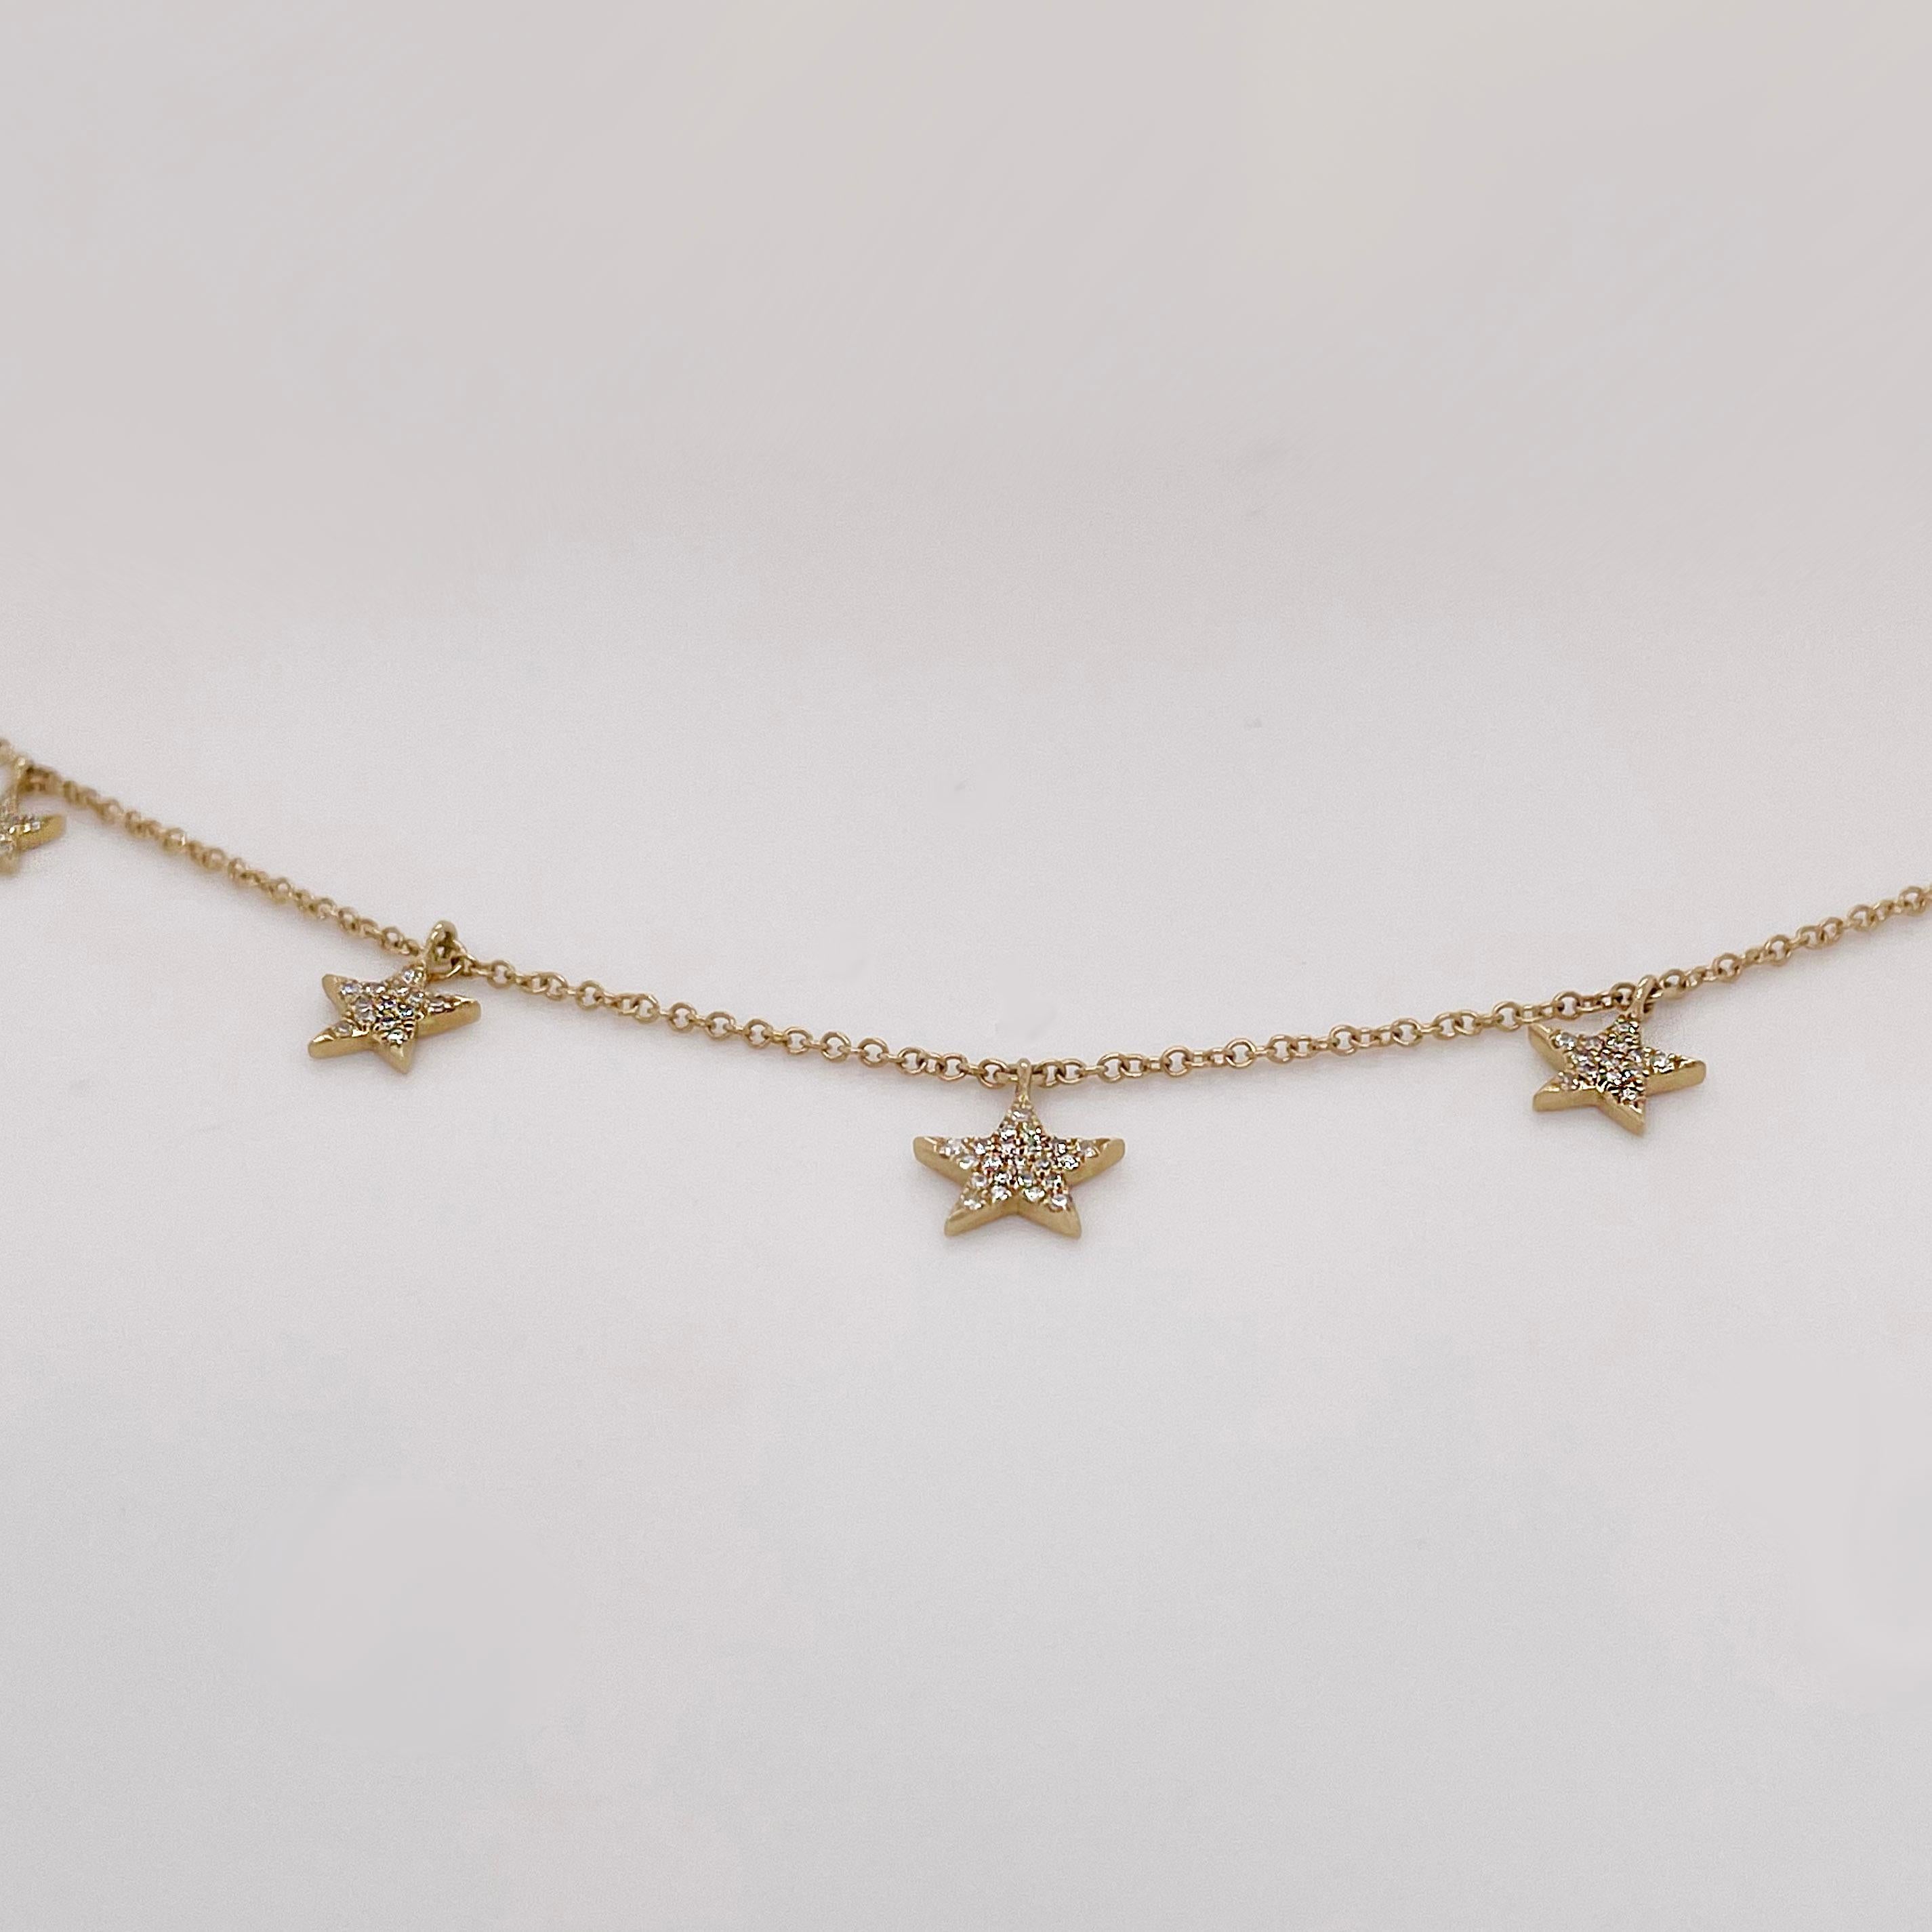 Diamond star station necklace for the diamond star in your life! This pave diamond star necklace has five star charms with round diamonds that are pave set in gold prong settings. The diamonds are excellent quality and sparkle brightly! The chain is